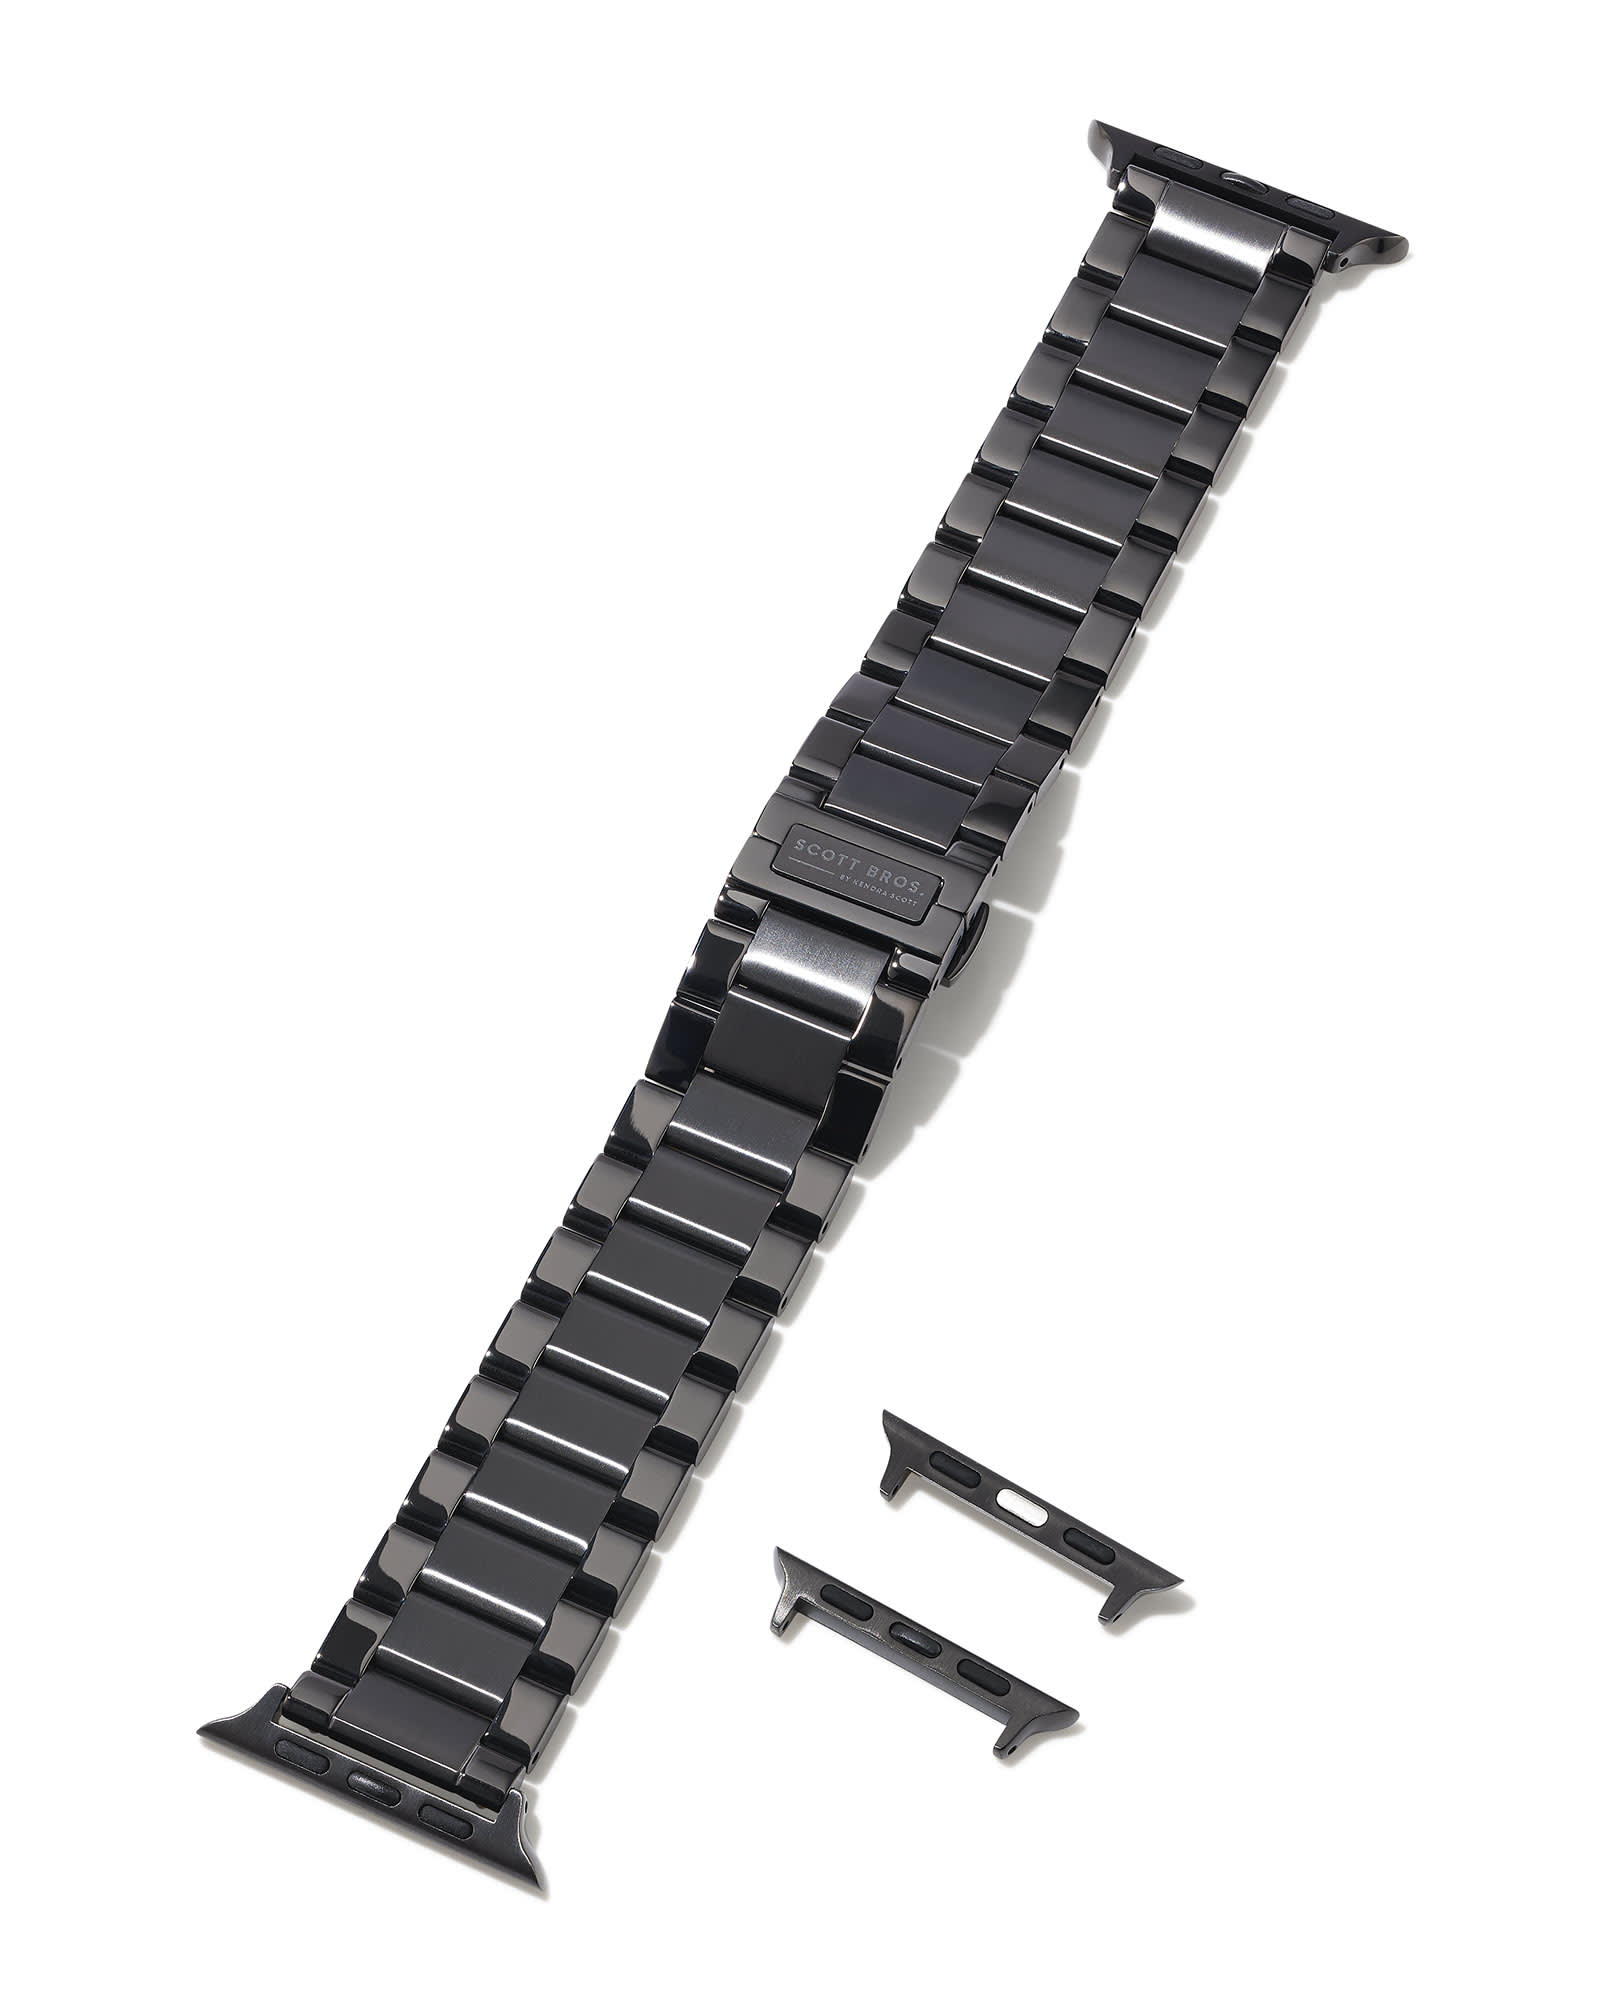 Weston 3 Link Watch Band in Black Tone Stainless Steel